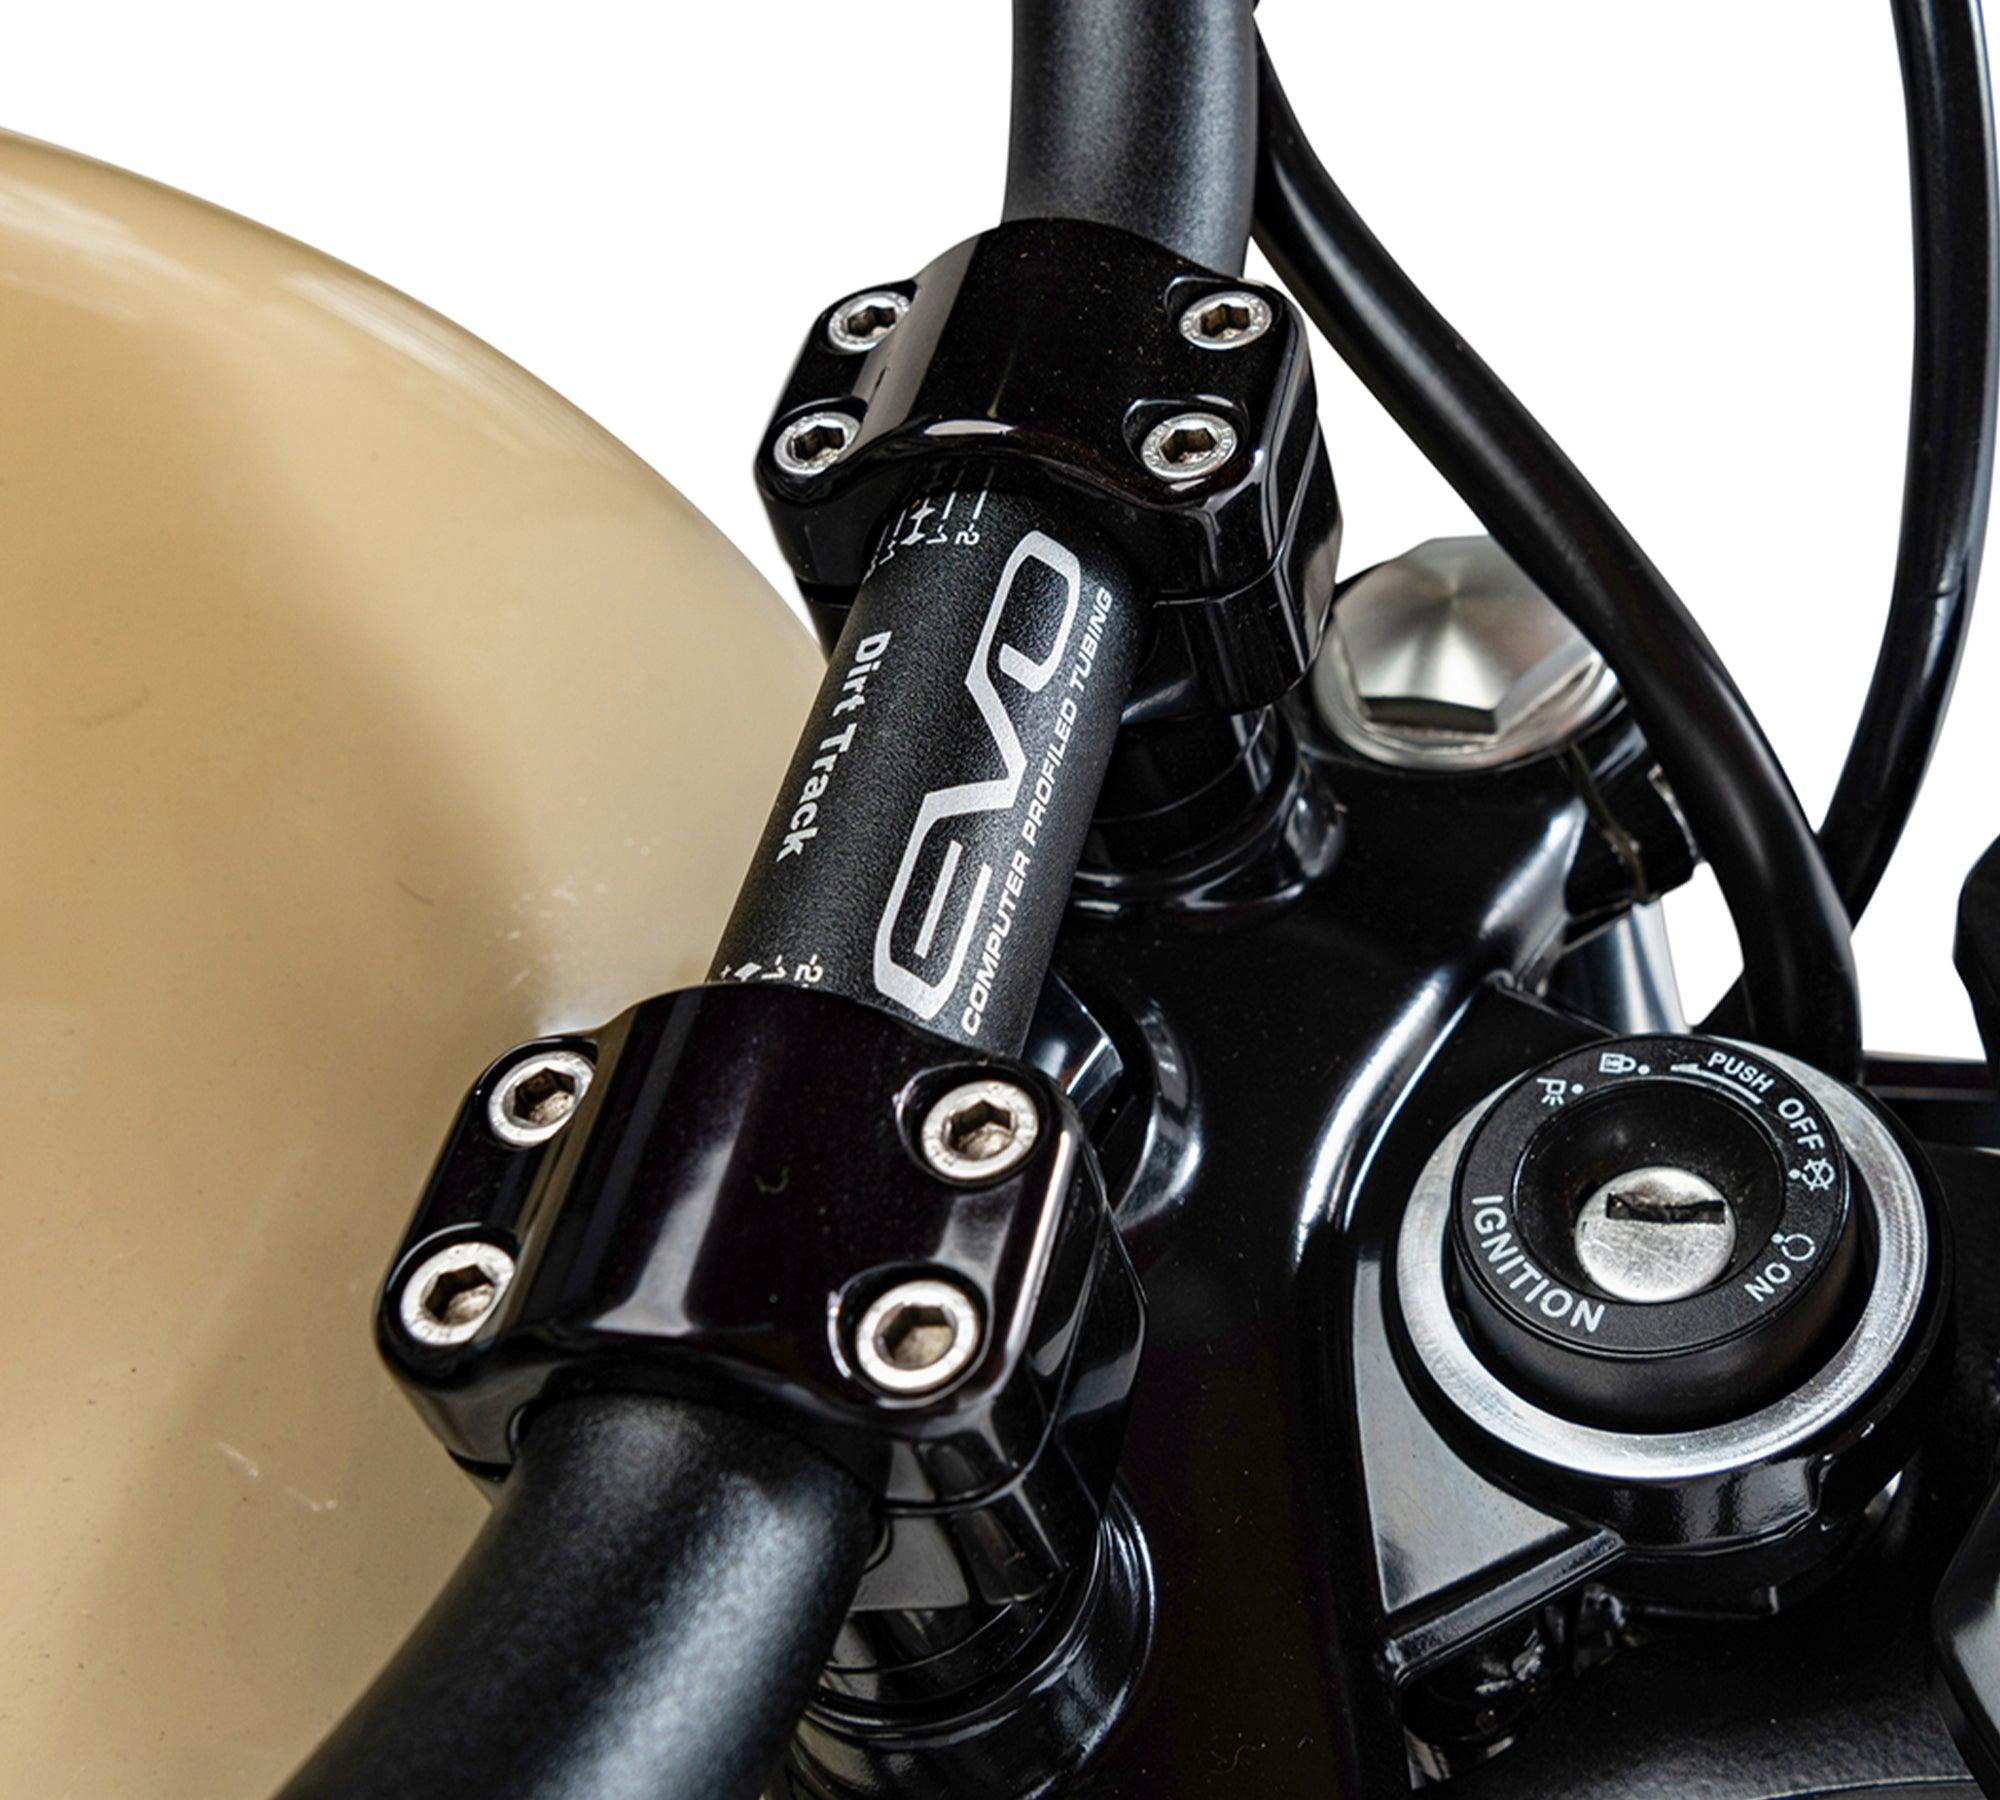 Stylish Four Bolt Clamps for Triumph Motorcycles - British Customs